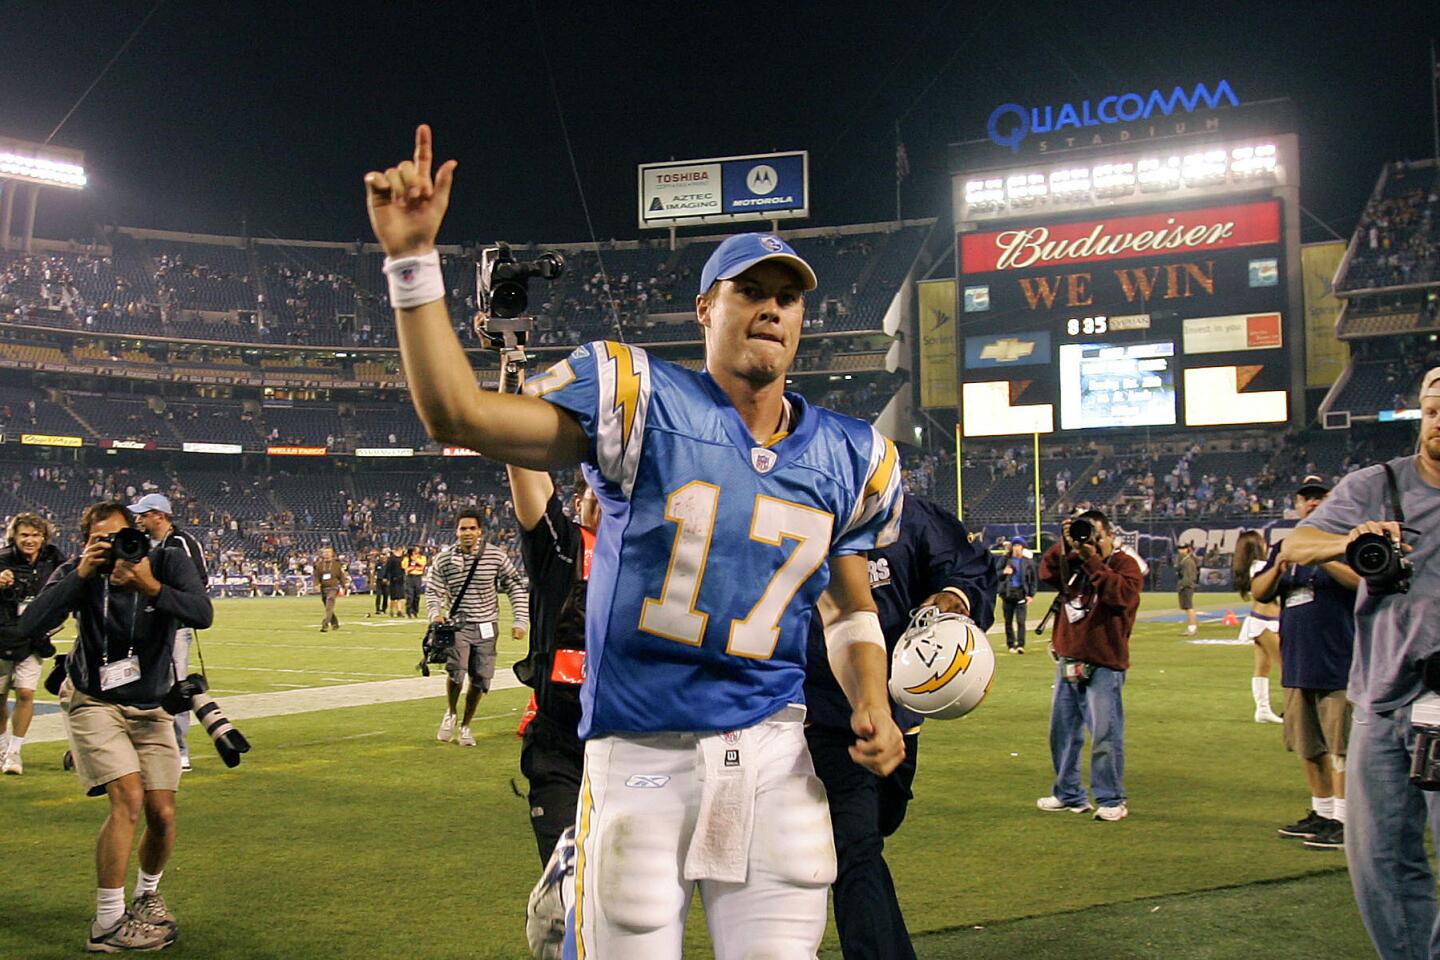 Chargers vs Steelers 10/8/06